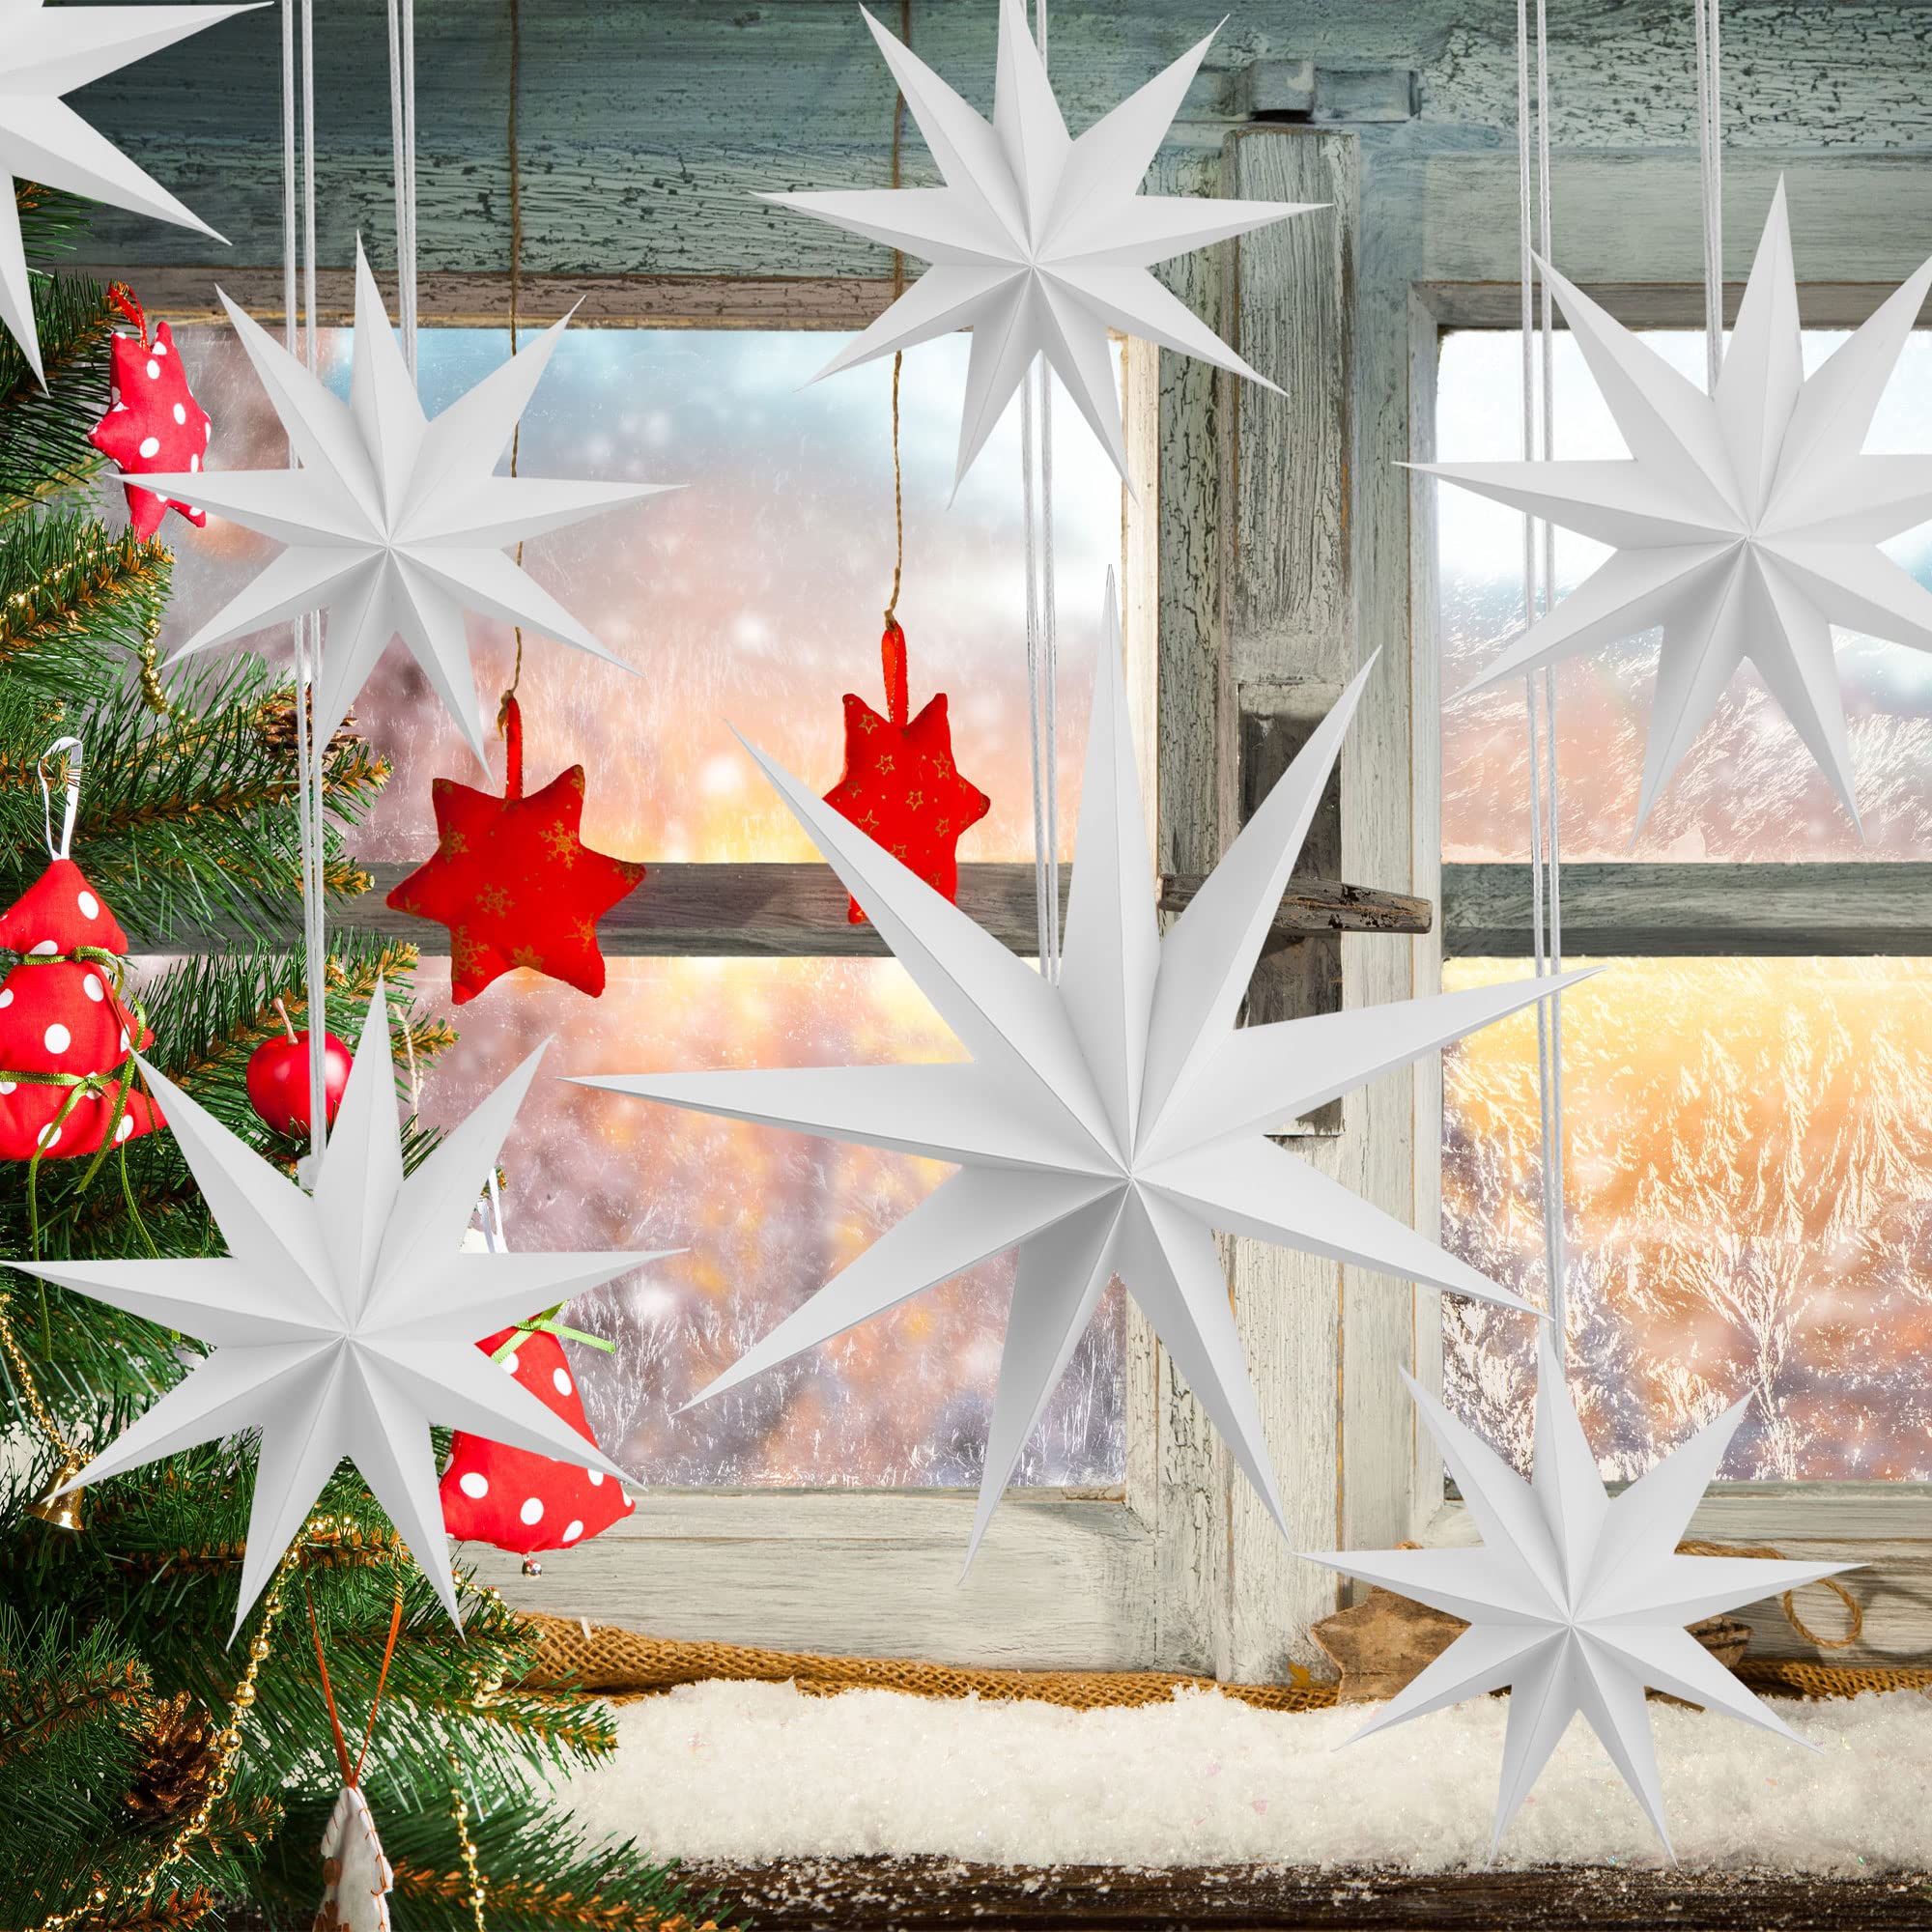 Cotiny 8 Pieces 3D Paper Stars Christmas White 9-Pointed Paper Star Hanging Decorations for Weddings Christmas Birthday Party Home Decor, 3 Size